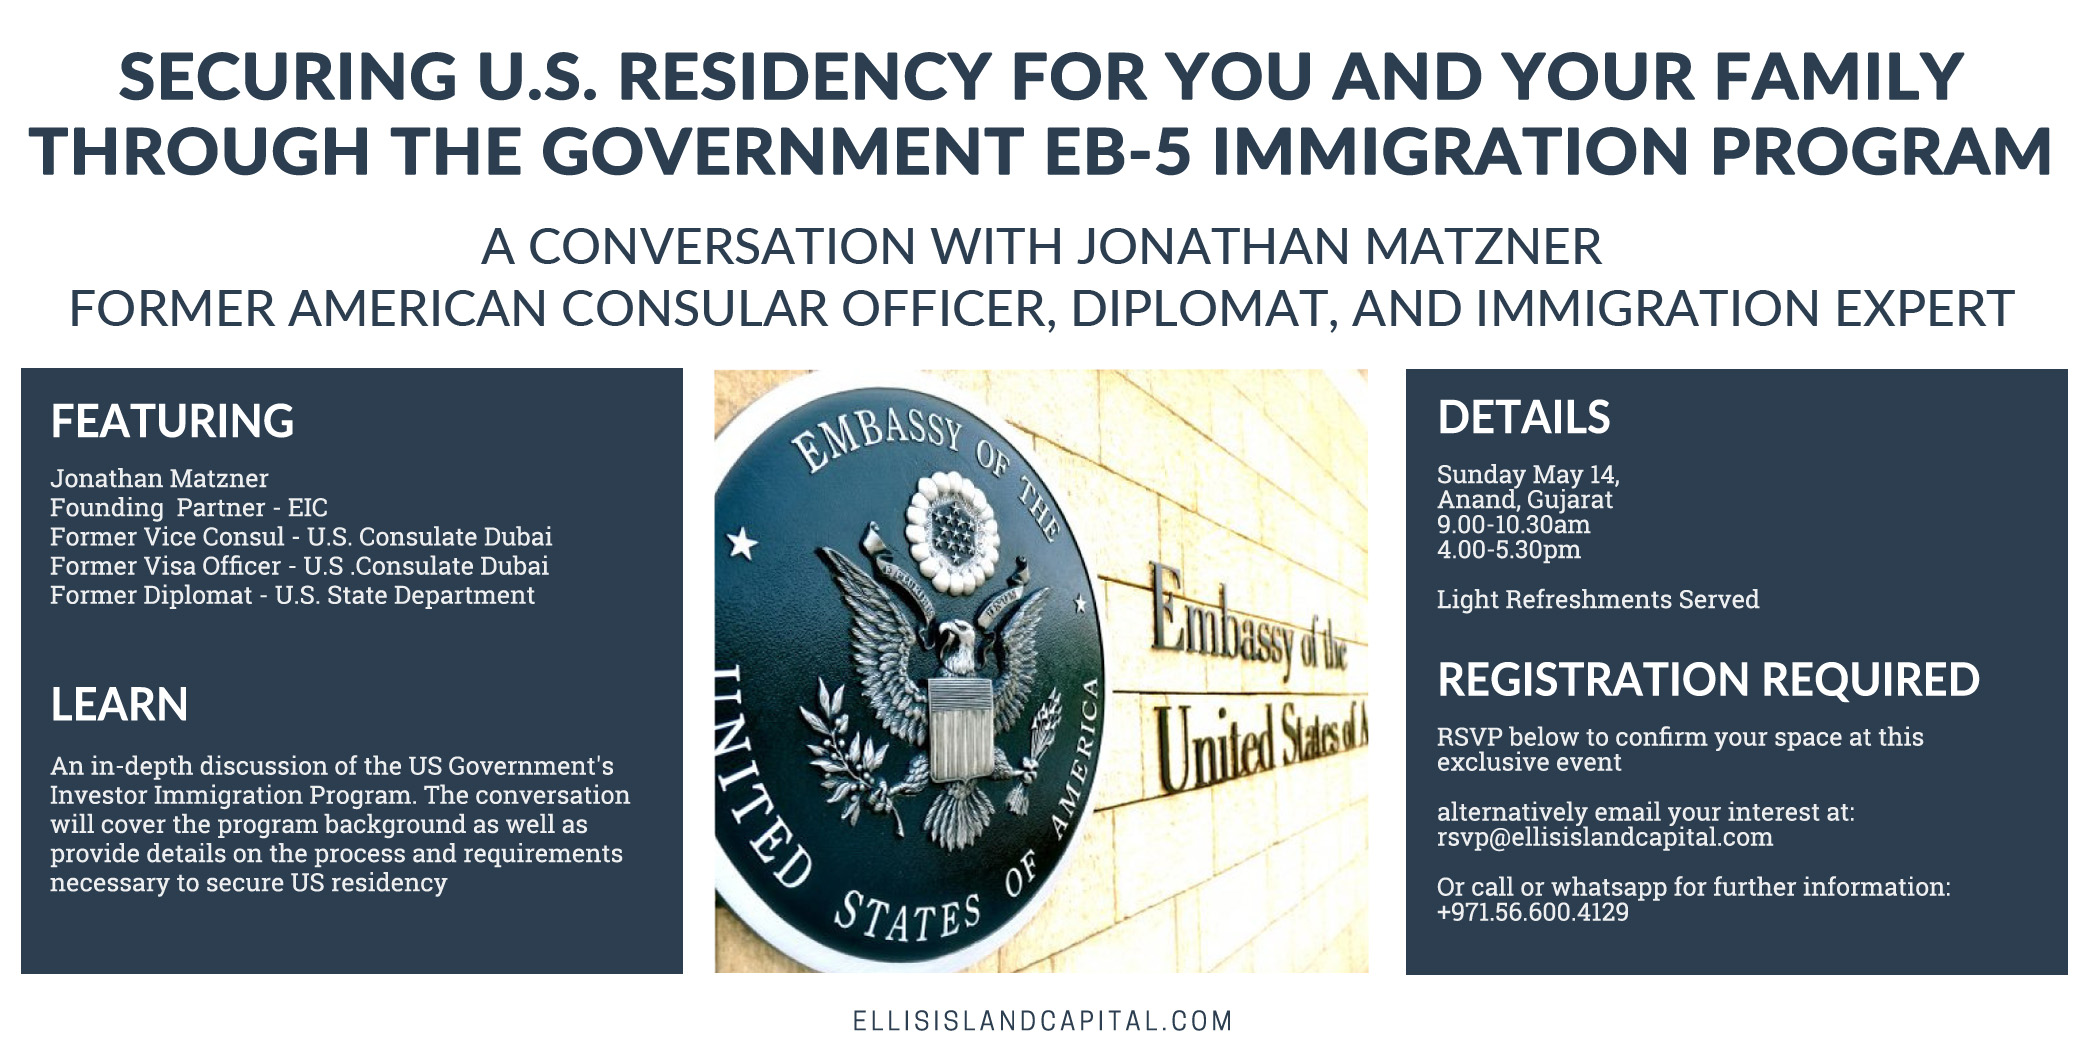 Securing U.S. Residency for you and your family through the Government EB-5 Immigration Program, Anand, Gujarat, India